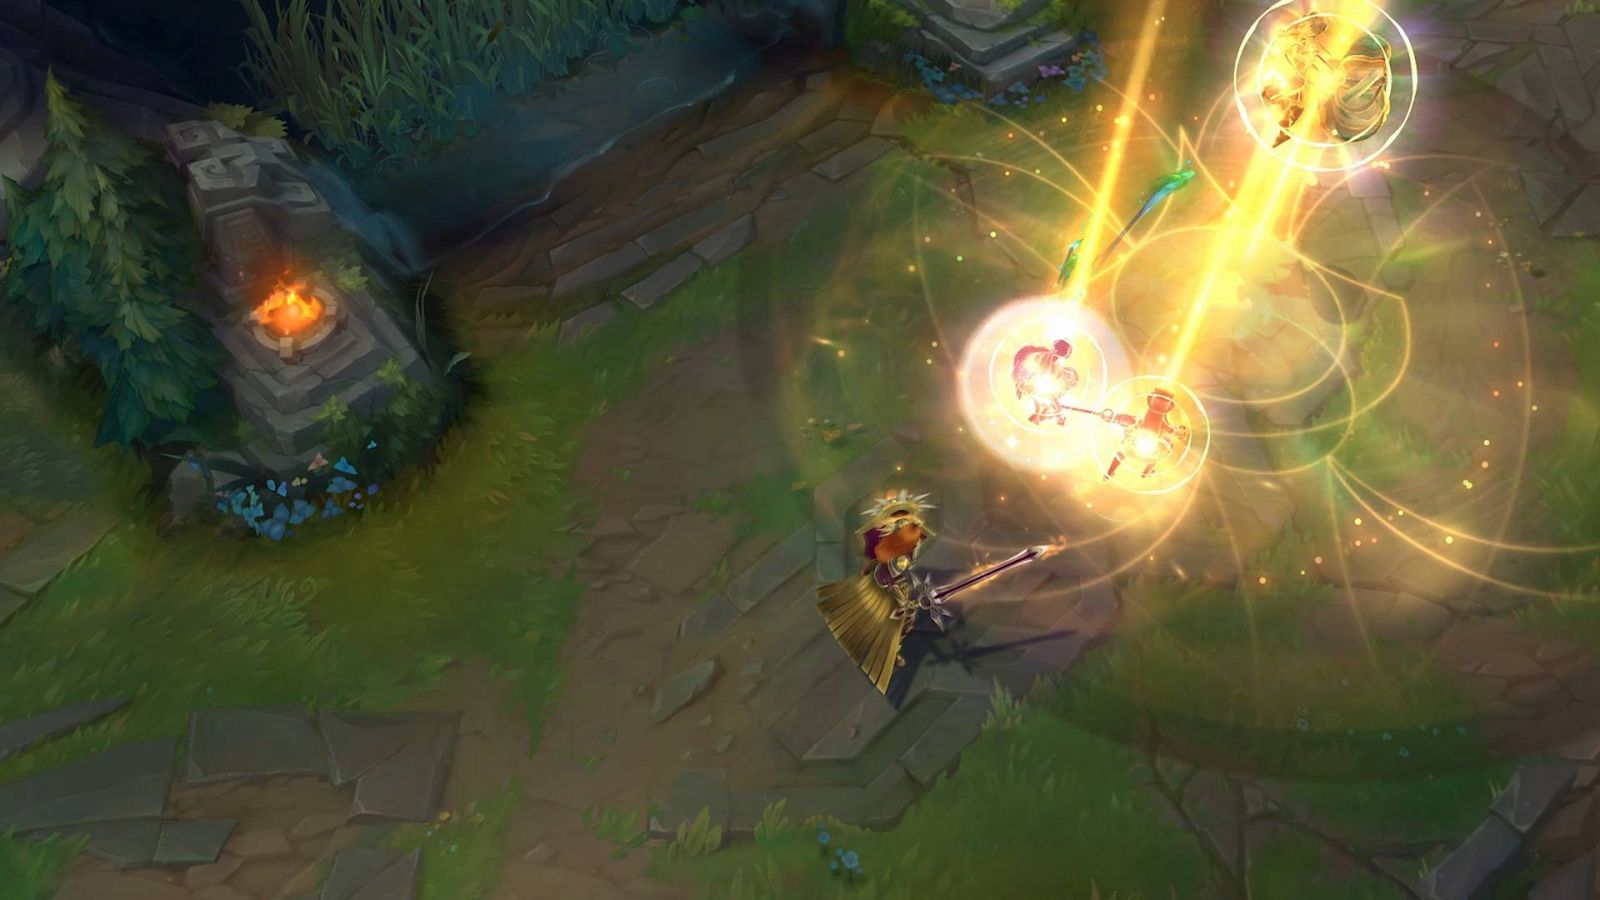 Milio performing Breath of Life in League of Legends.